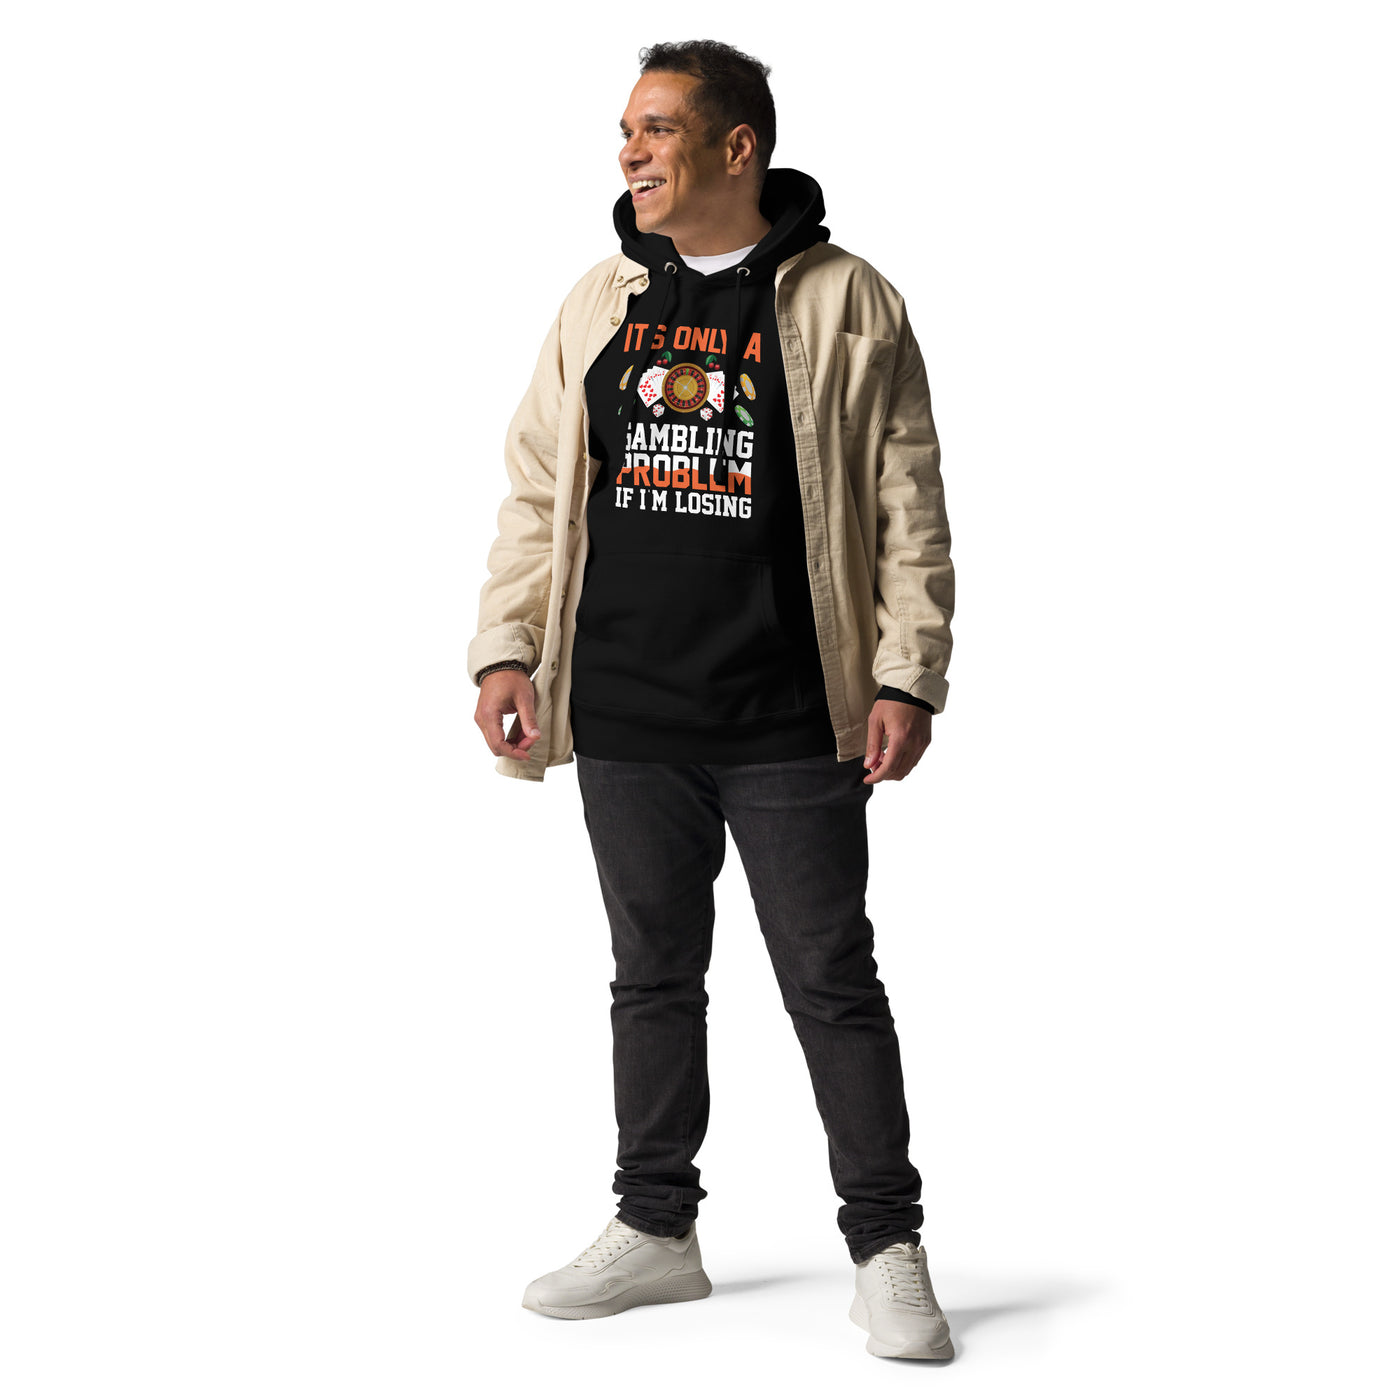 It's only a Gambling Problem, if I am losing - Unisex Hoodie